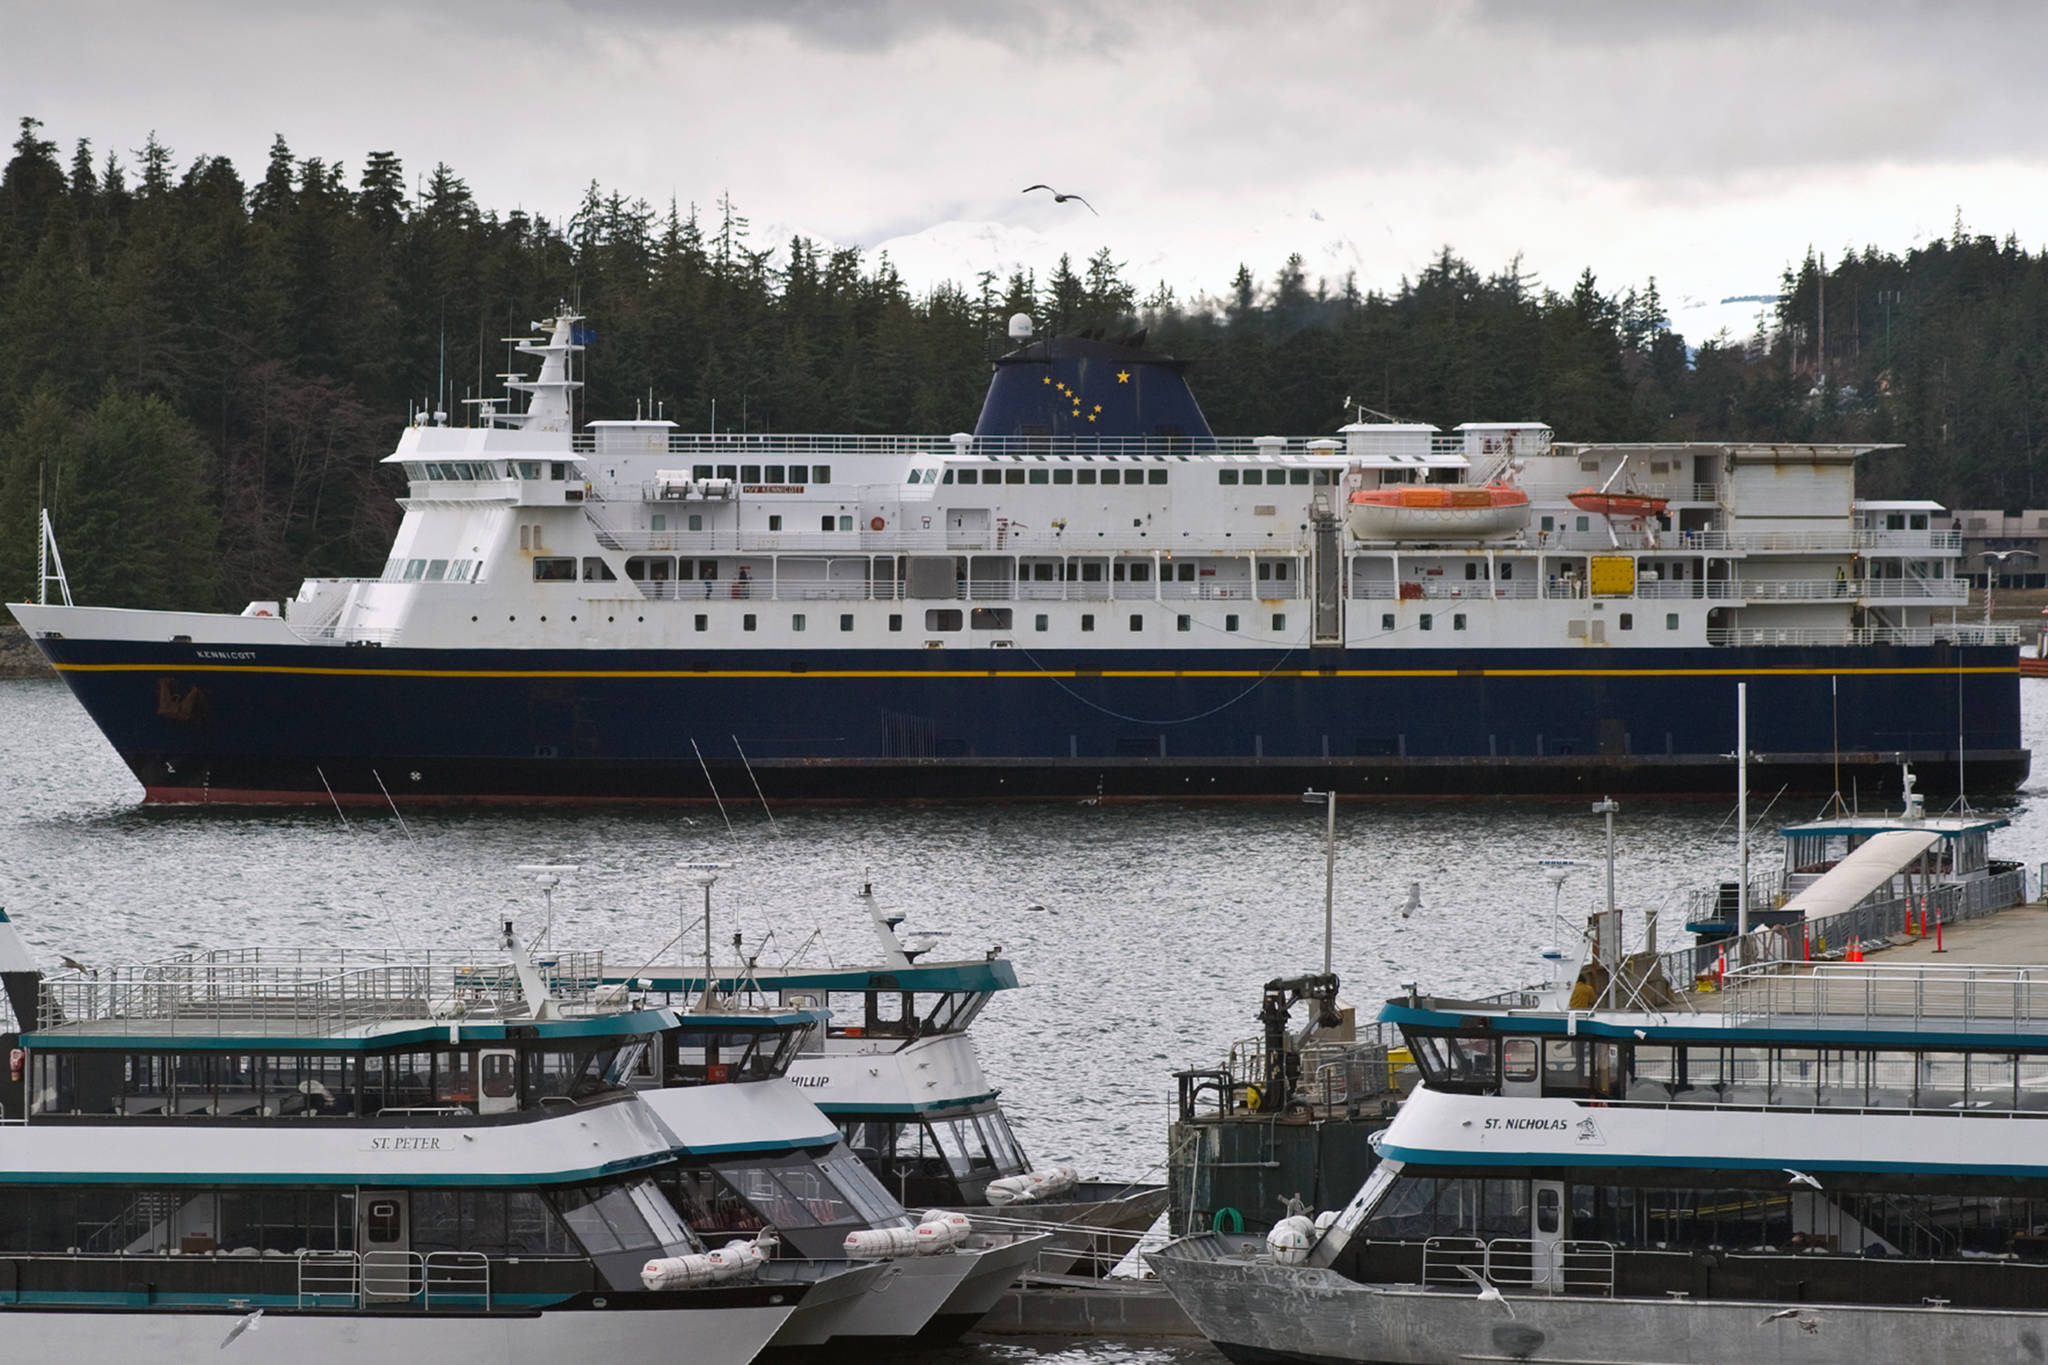 The Alaska Marine Highway System’s M/V Kennicott pulls away from the Auke Bay Ferry Terminal in this August 2014 photo. (Michael Penn | Juneau Empire File)